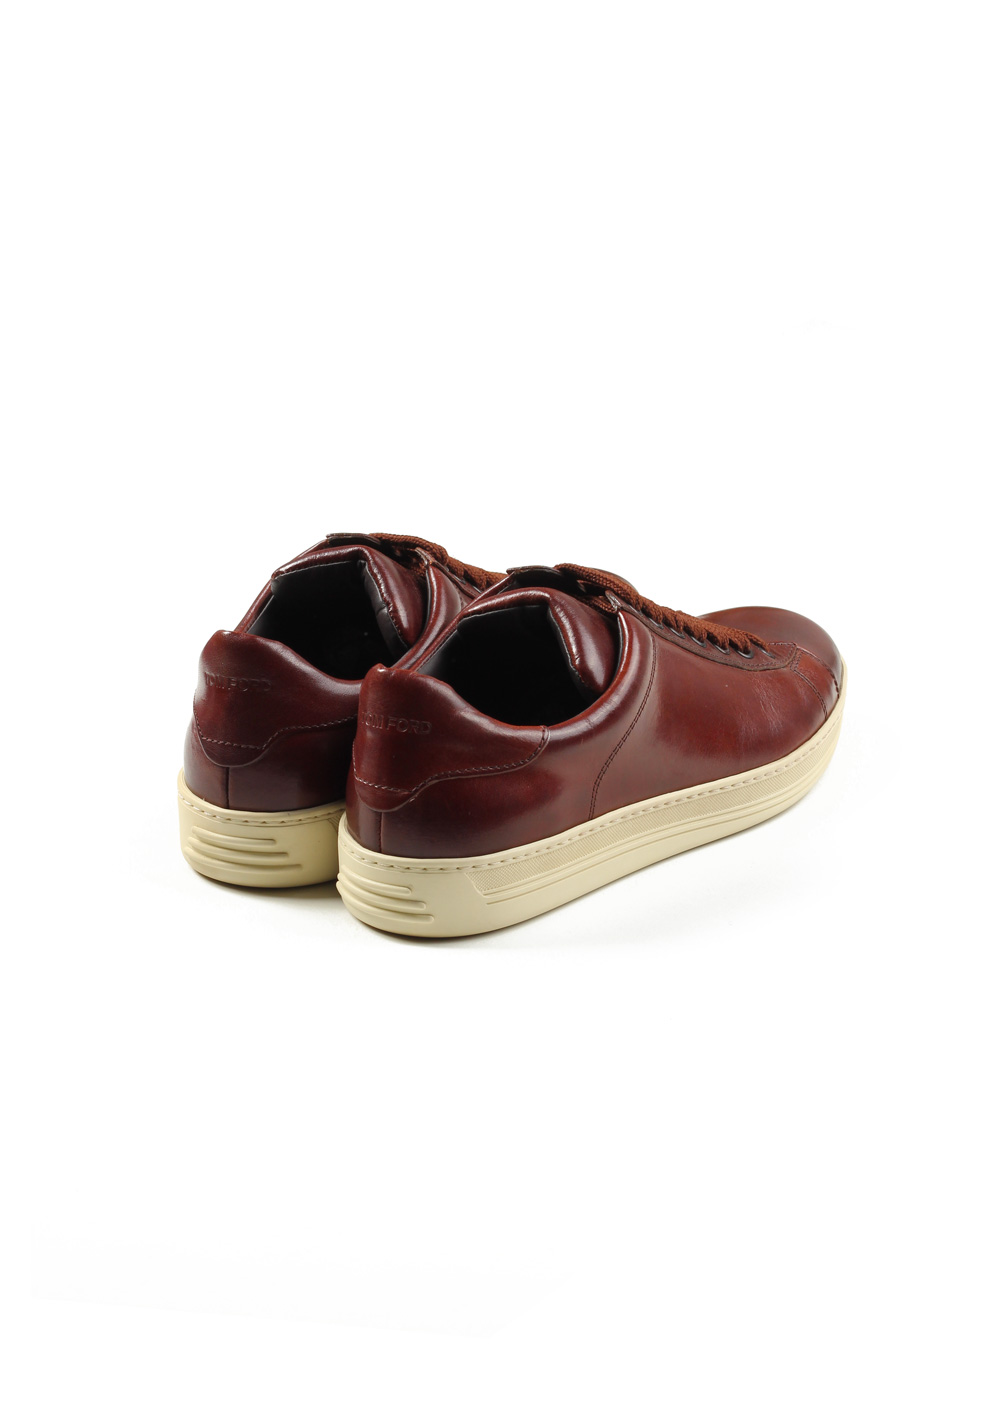 TOM FORD Russel Low Top Brown Leather Sneaker Shoes Size 7.5 UK / 8.5 U.S. | Costume Limité